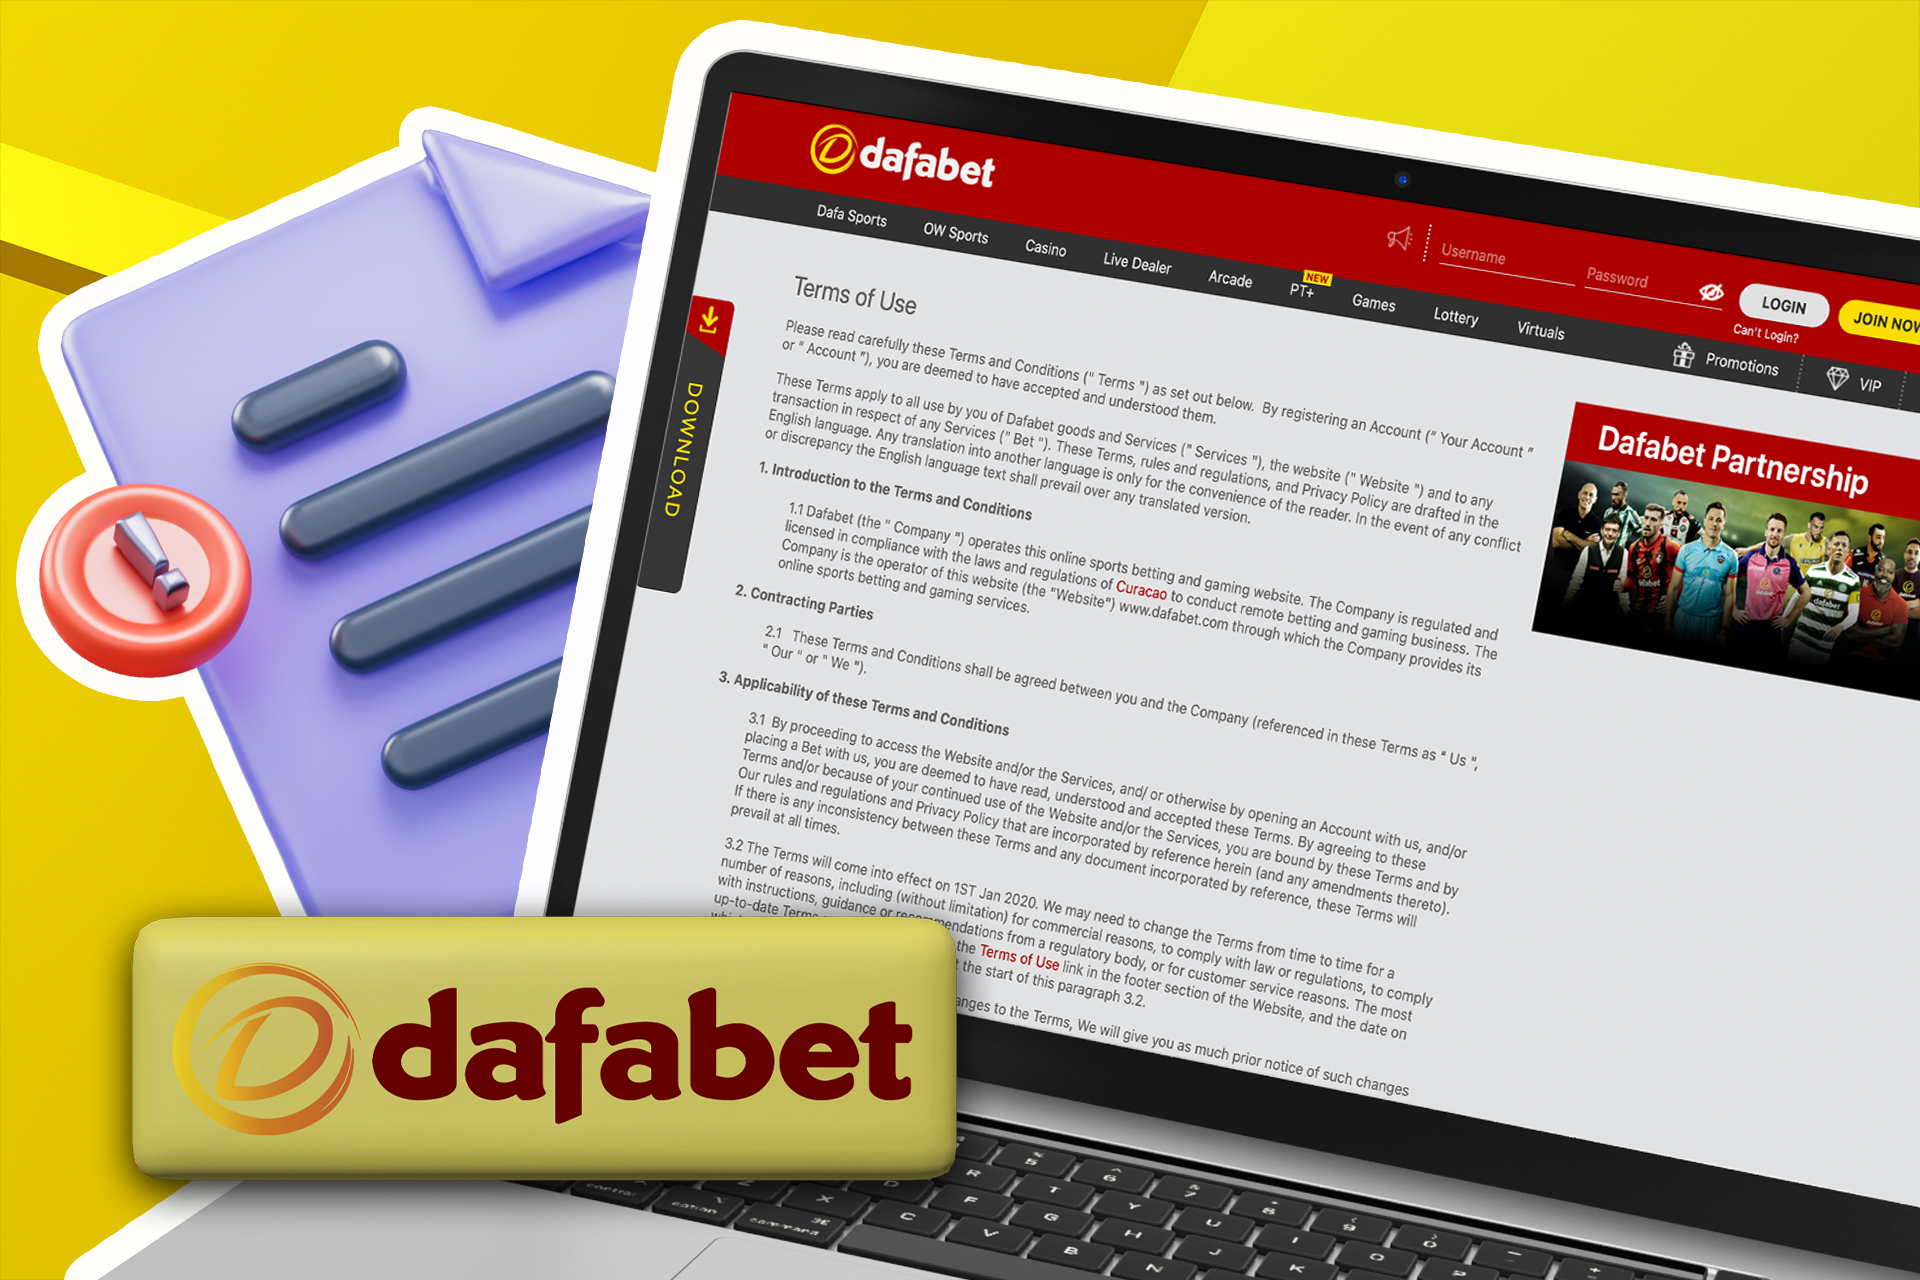 Get acquainted with the Dafabet terms and conditions.